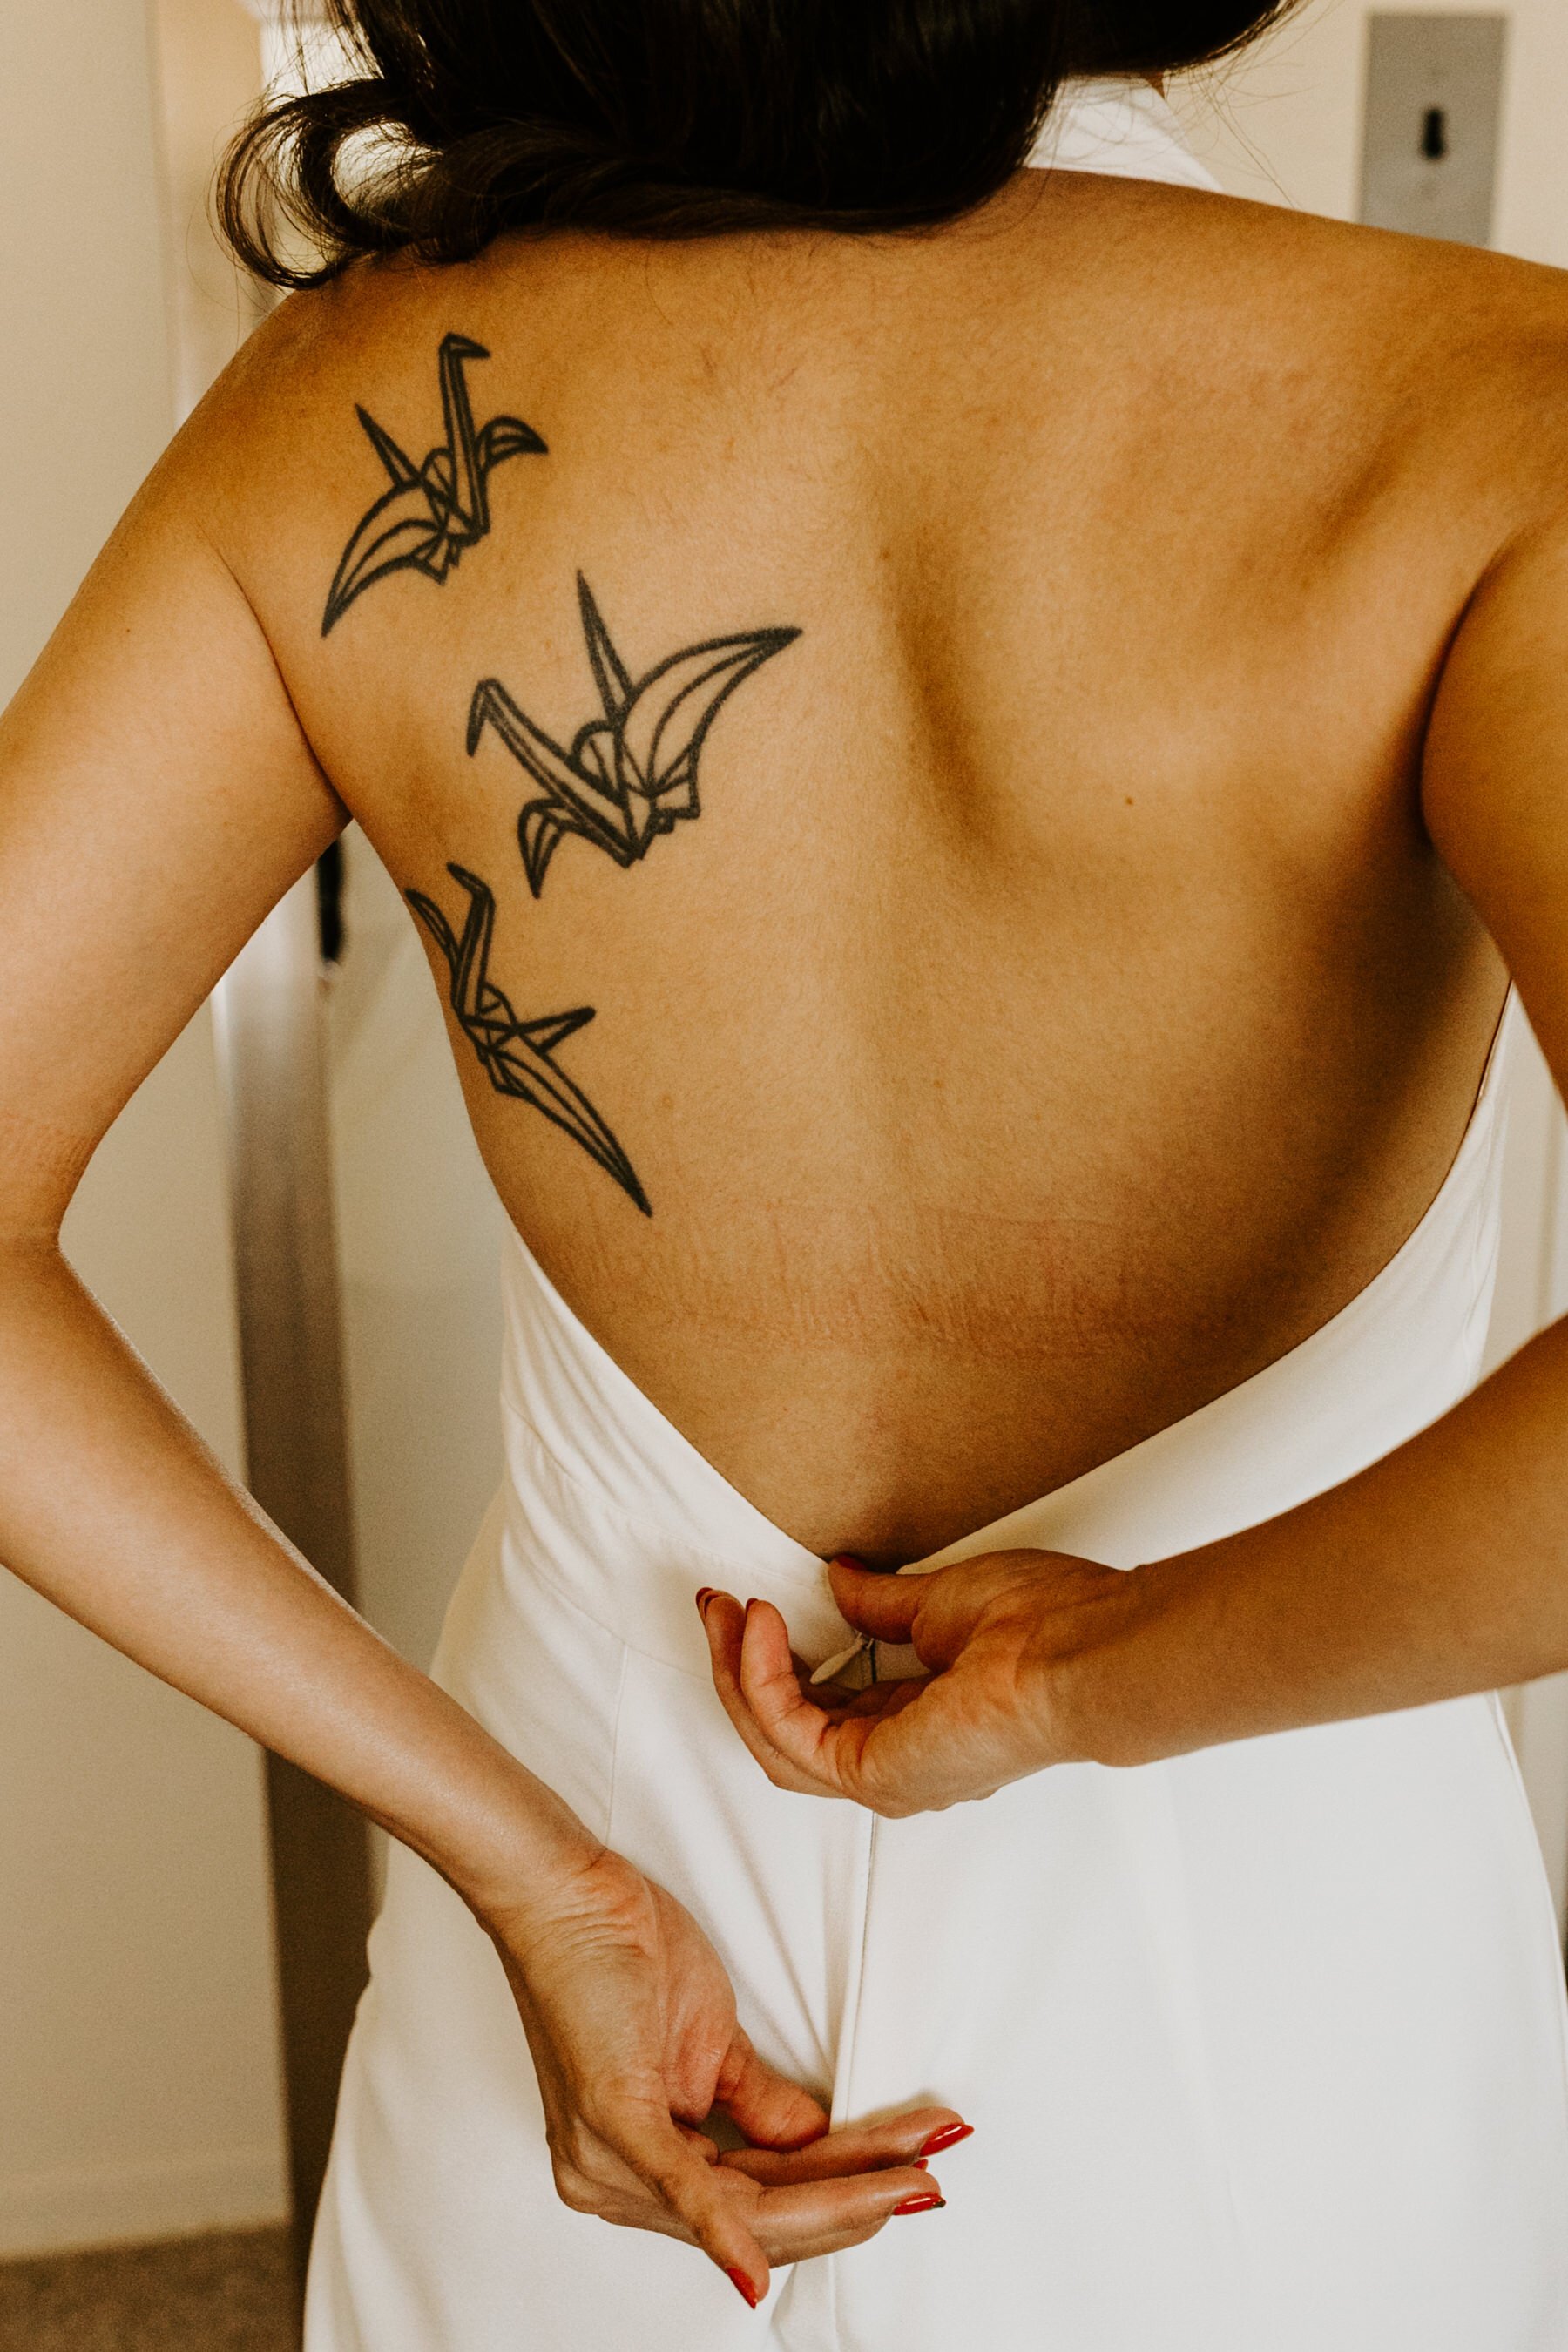 Bride with back tattoos and low back wedding jumsuit | Photo by Tida Svy | www.tidasvy.com